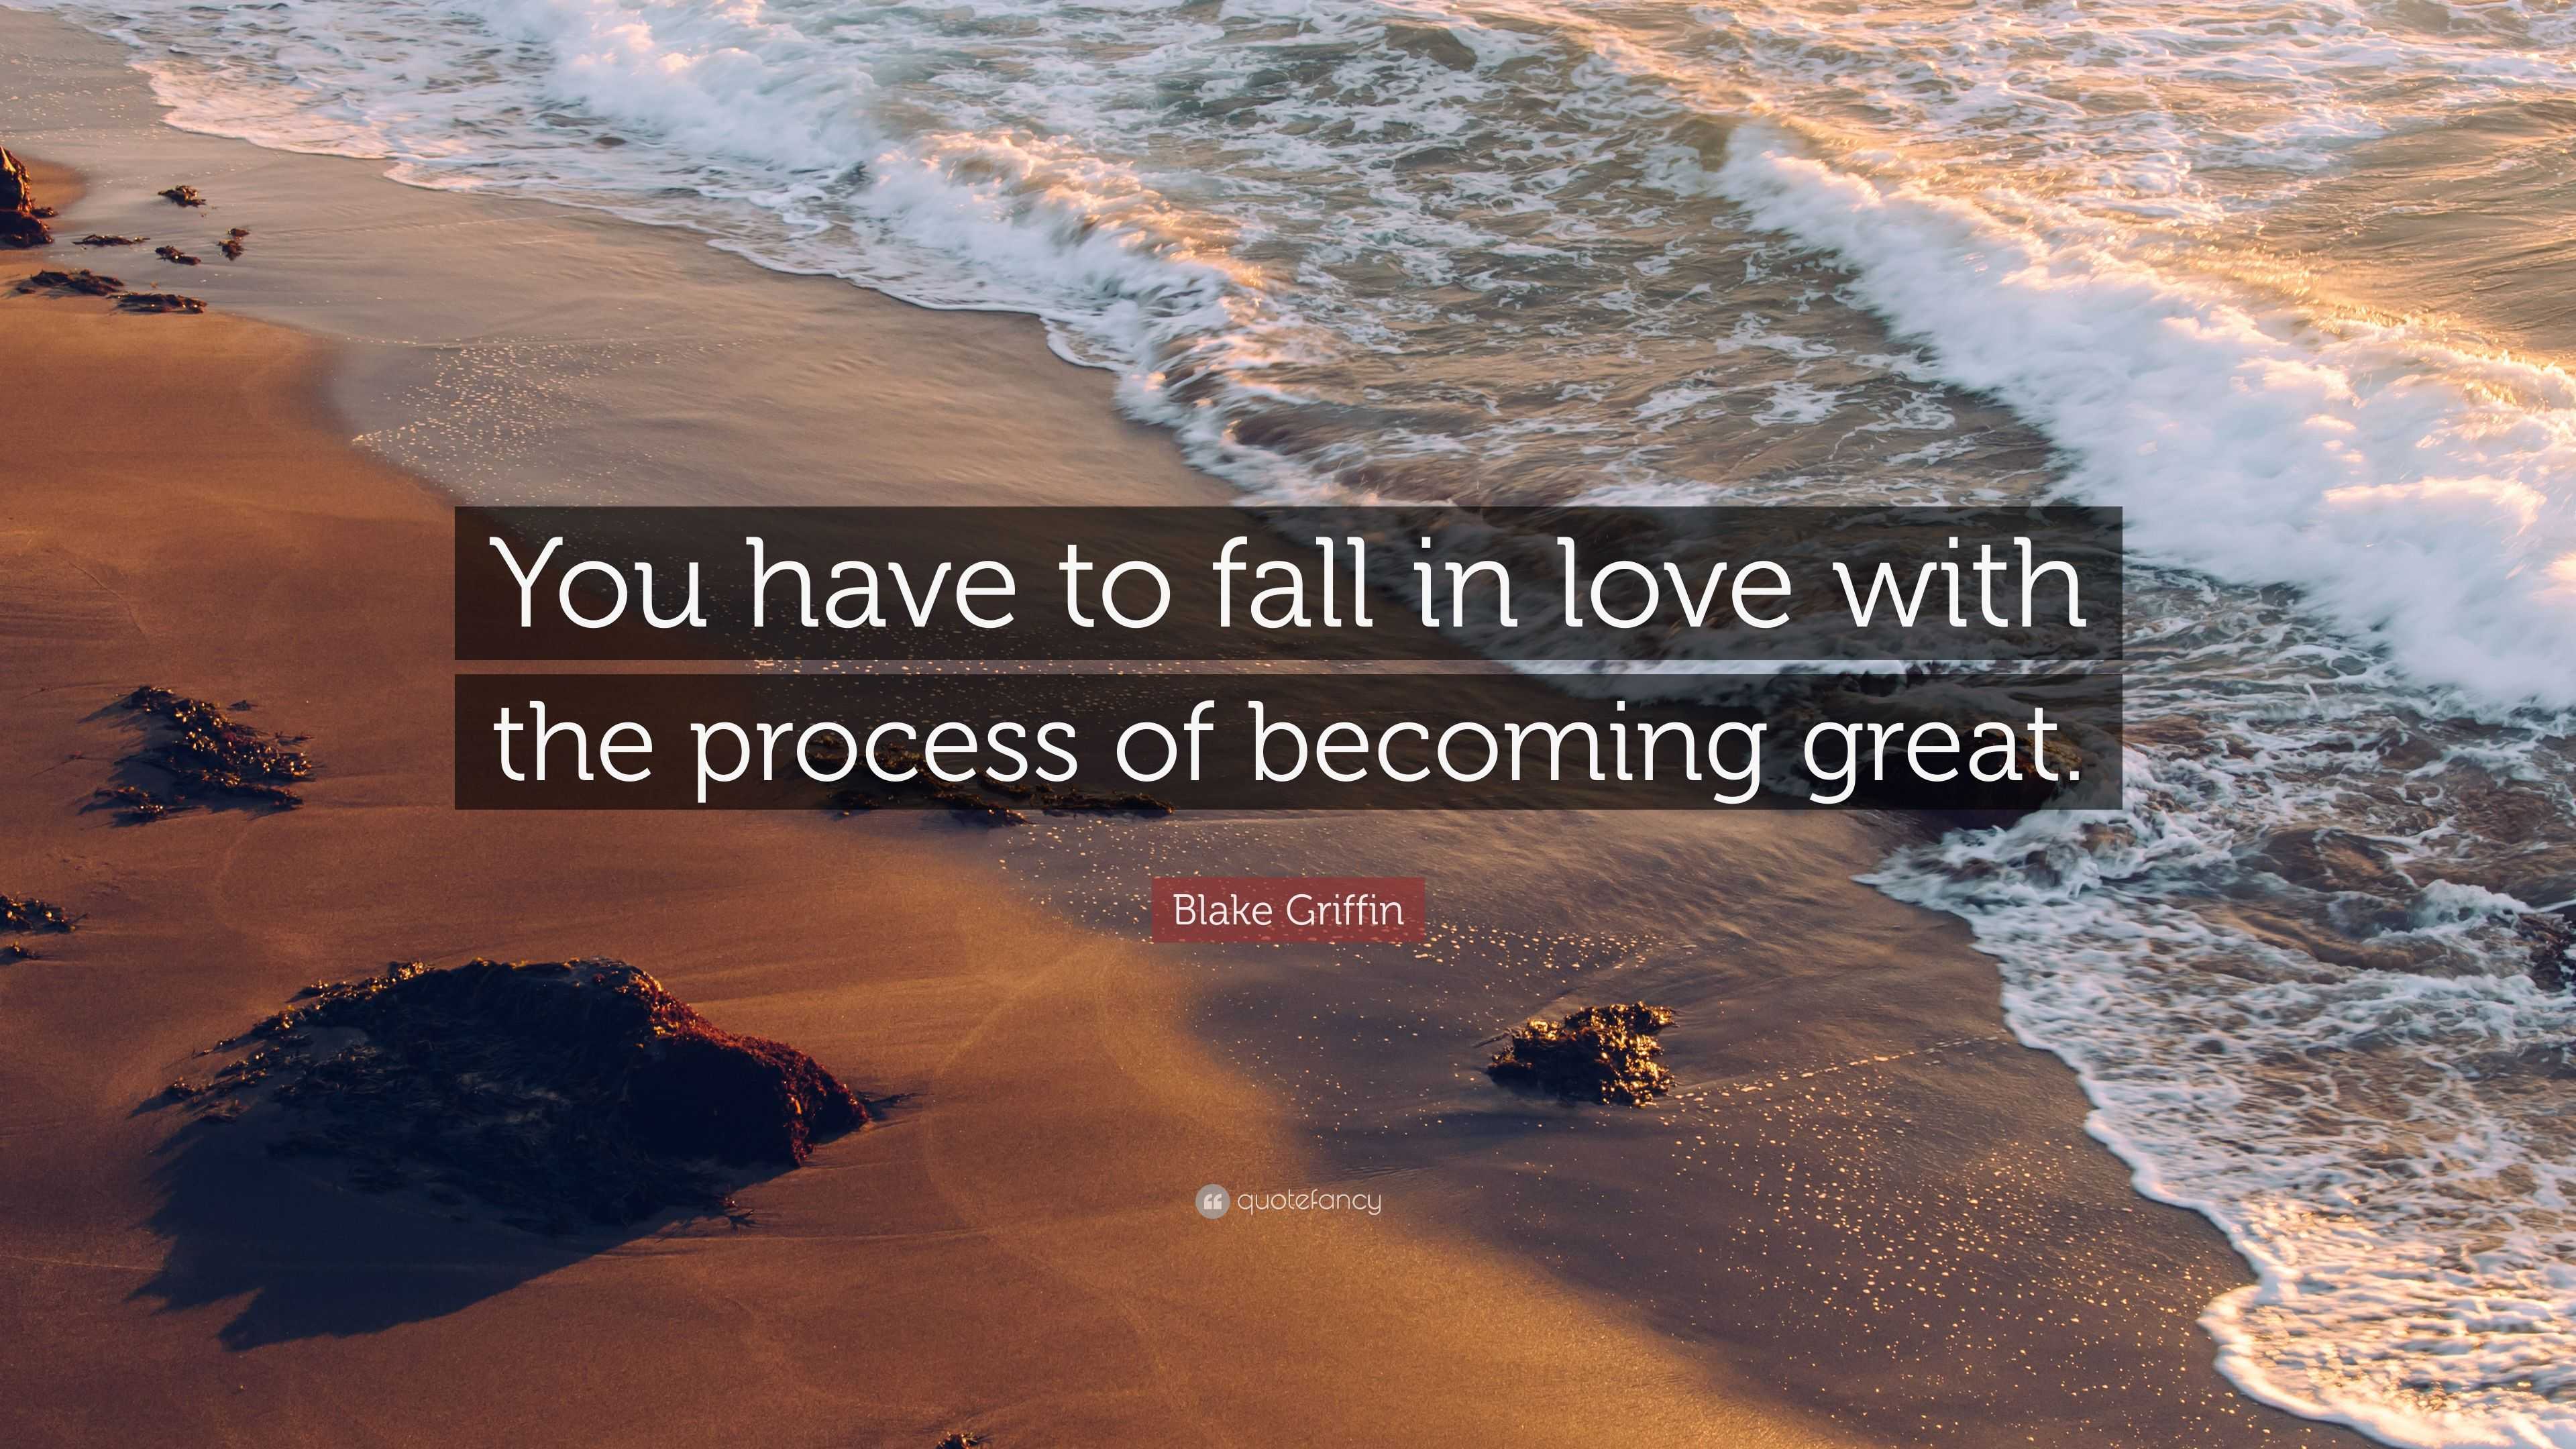 Blake Griffin Quote: “You have to fall in love with the process of